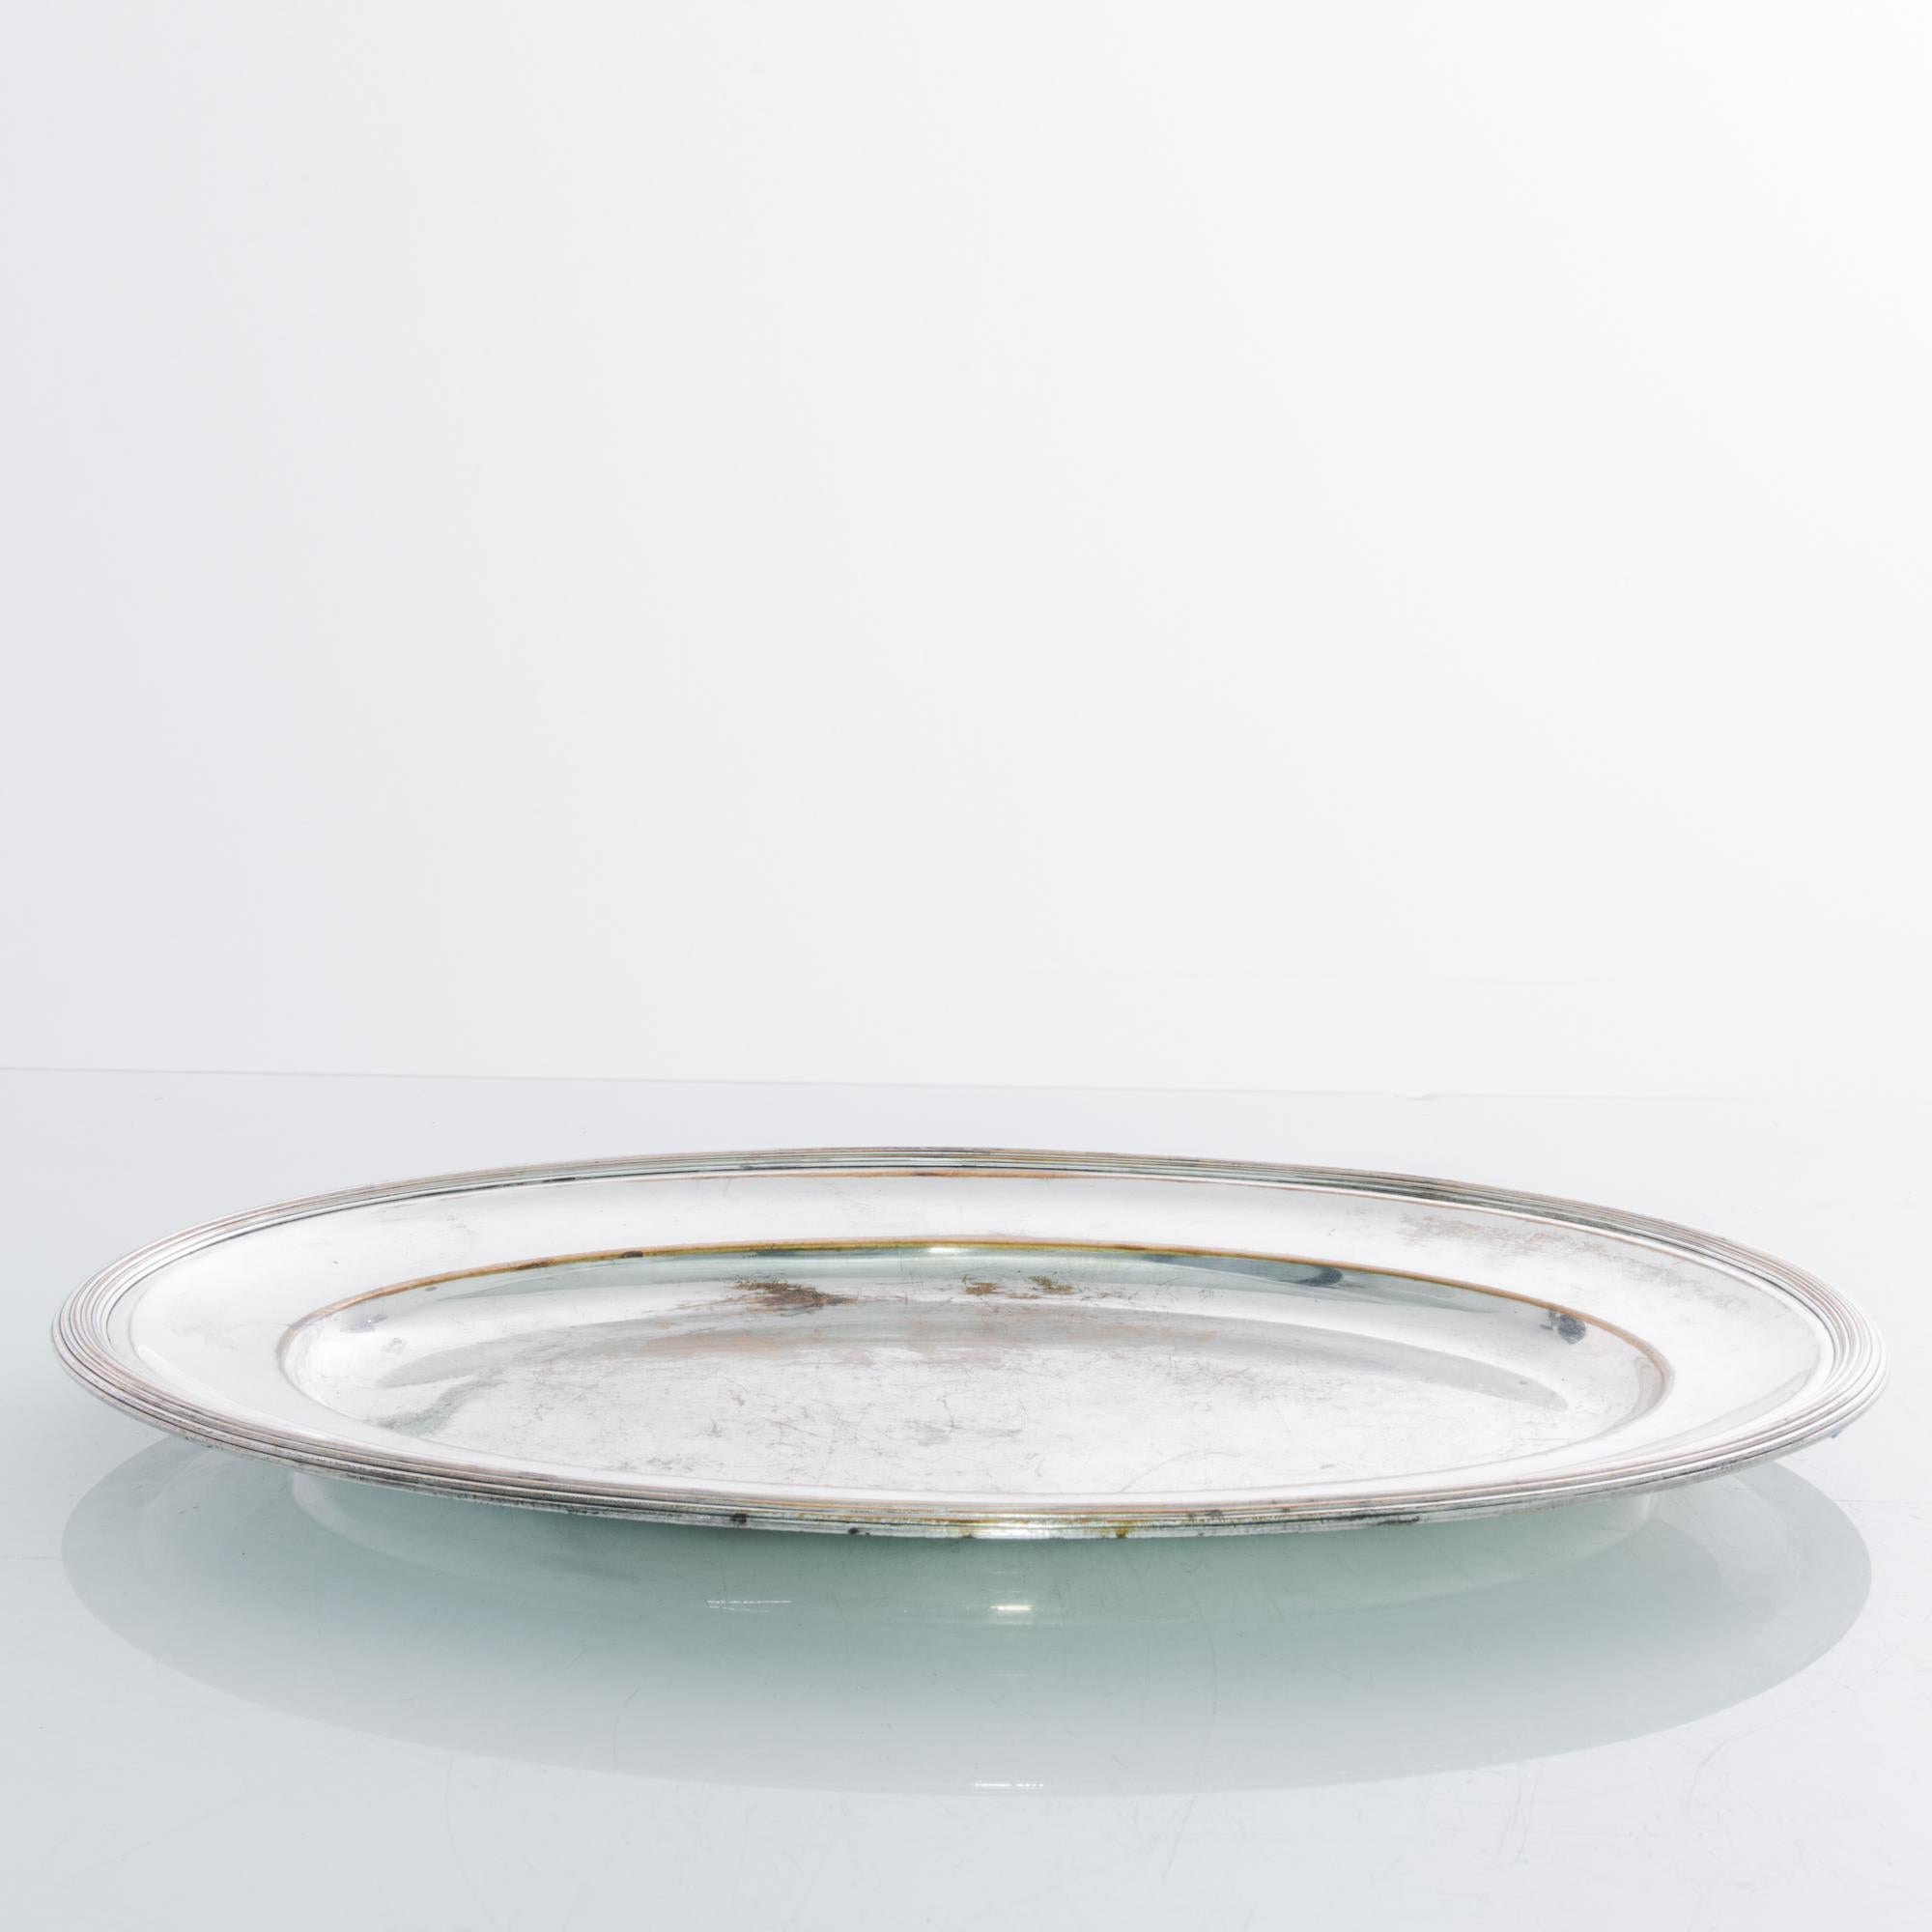 A silver plated serving tray from France, circa 1900. An elegant round shape in rich silver; a raised rim creates a natural frame for the food being served, tinted with wear to reveal the golden brass metal. This enchanting vintage piece would make